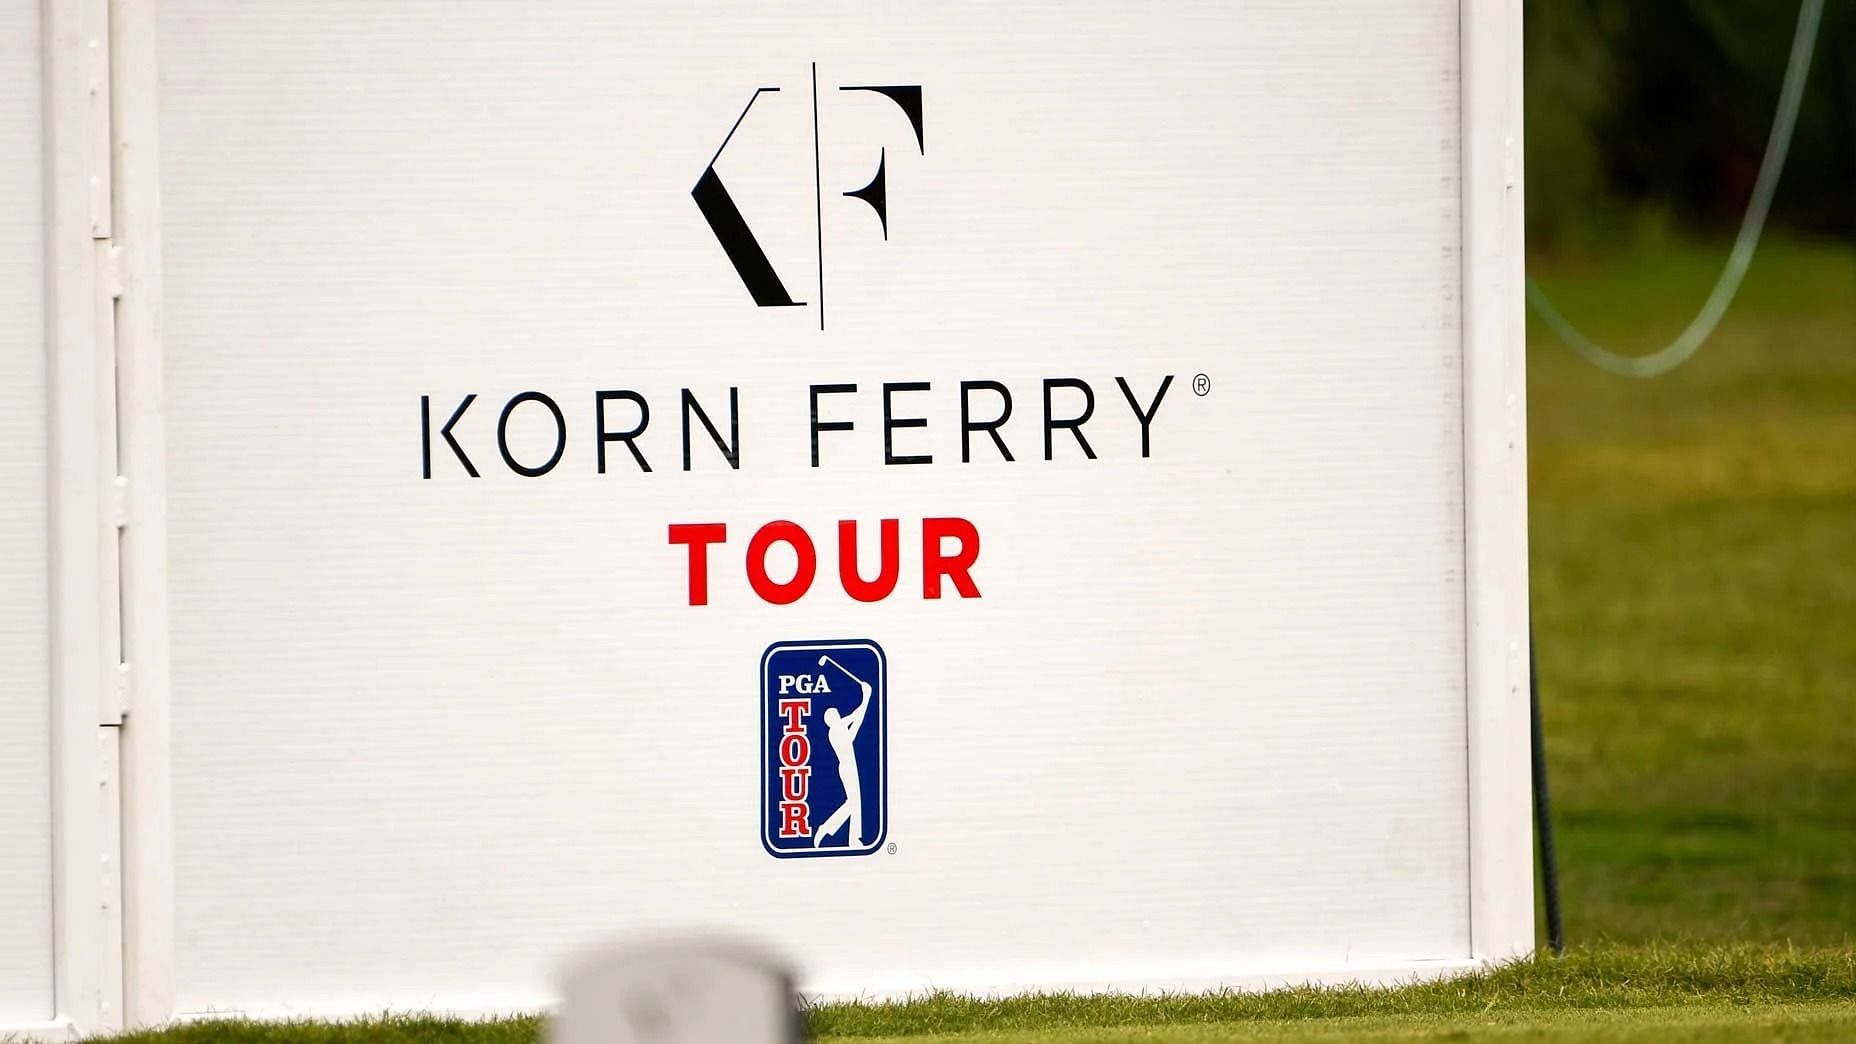 The next event on Korn Ferry Tour is the Club Championship scheduled to start on March 23